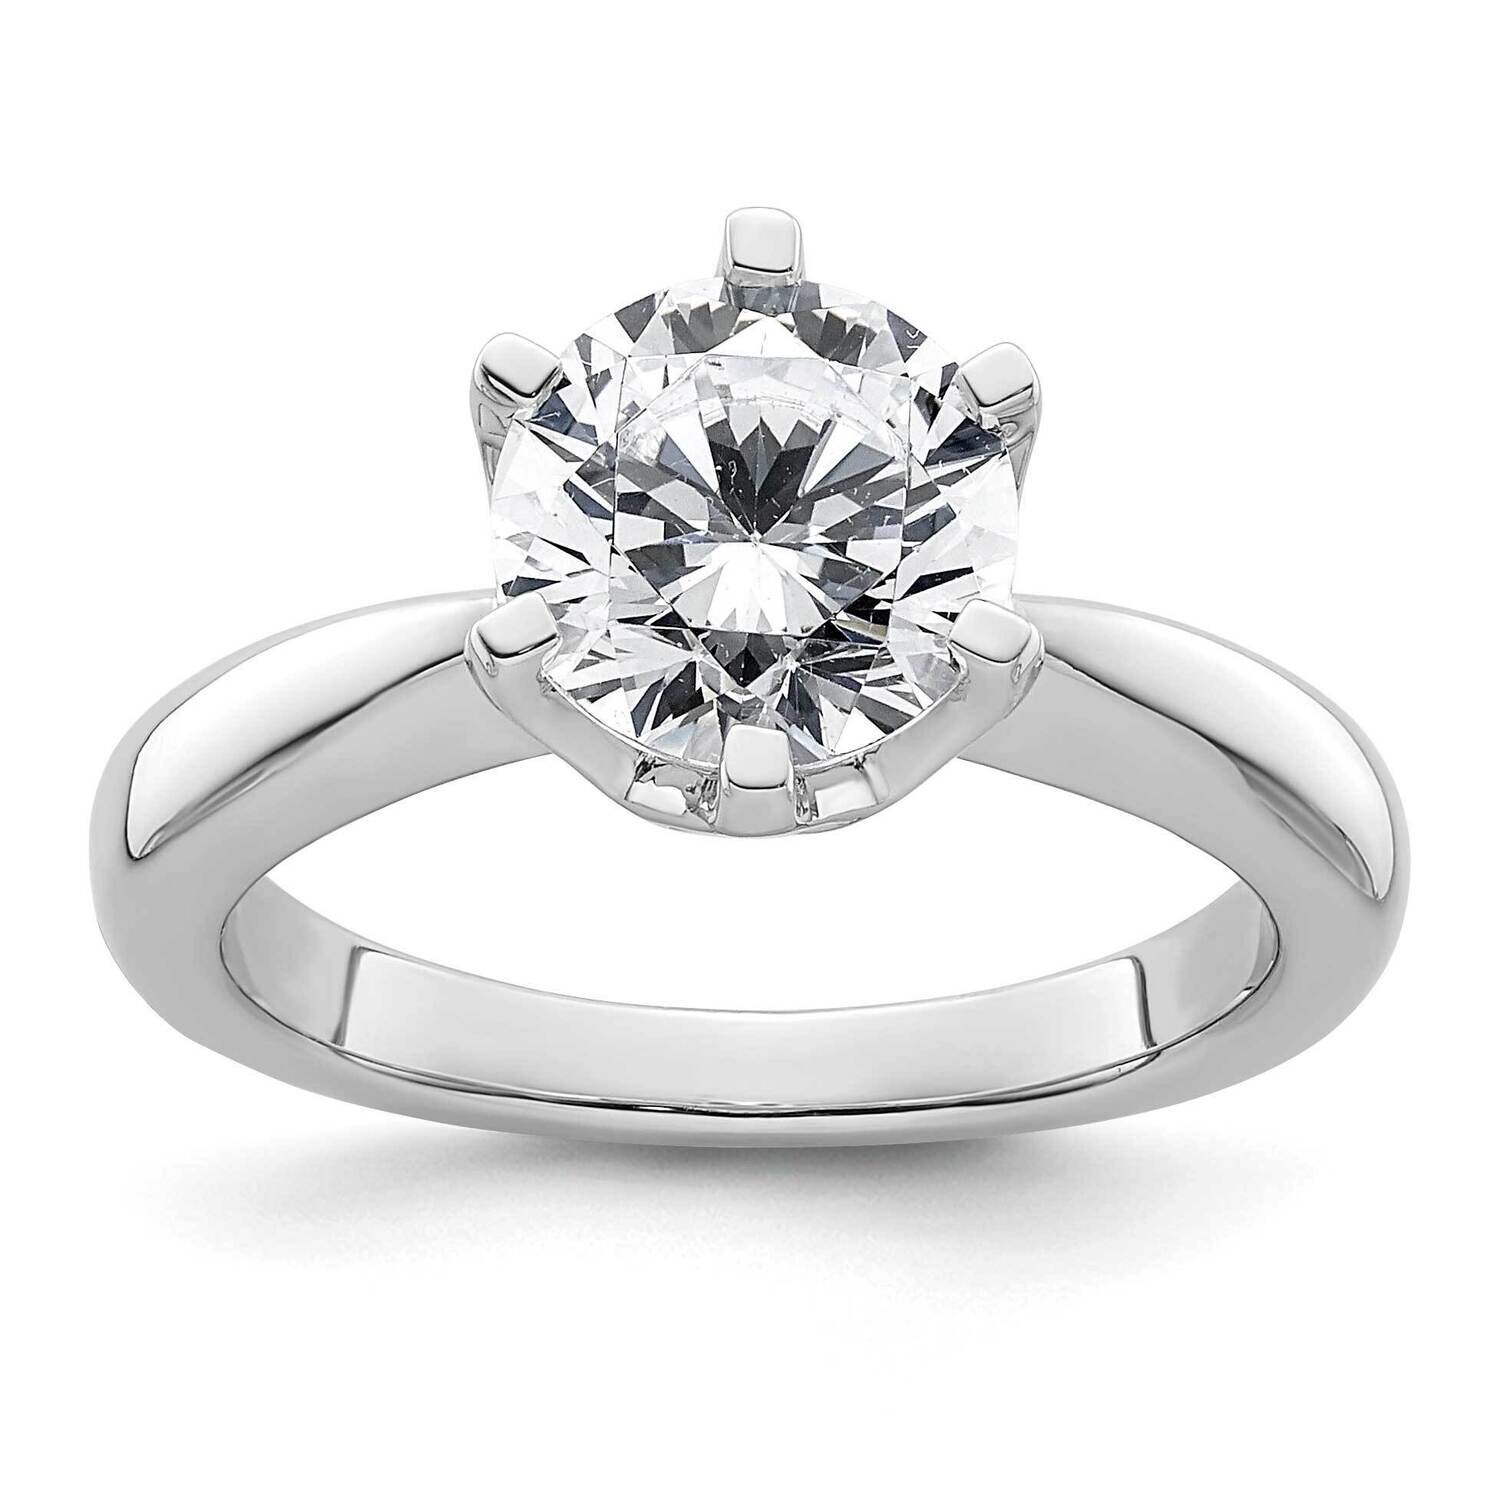 2 Carat 8.20 mm 6-Prong Round Solitaire Engagement Ring Mounting 14k White Gold RM1936E-200-CWAA